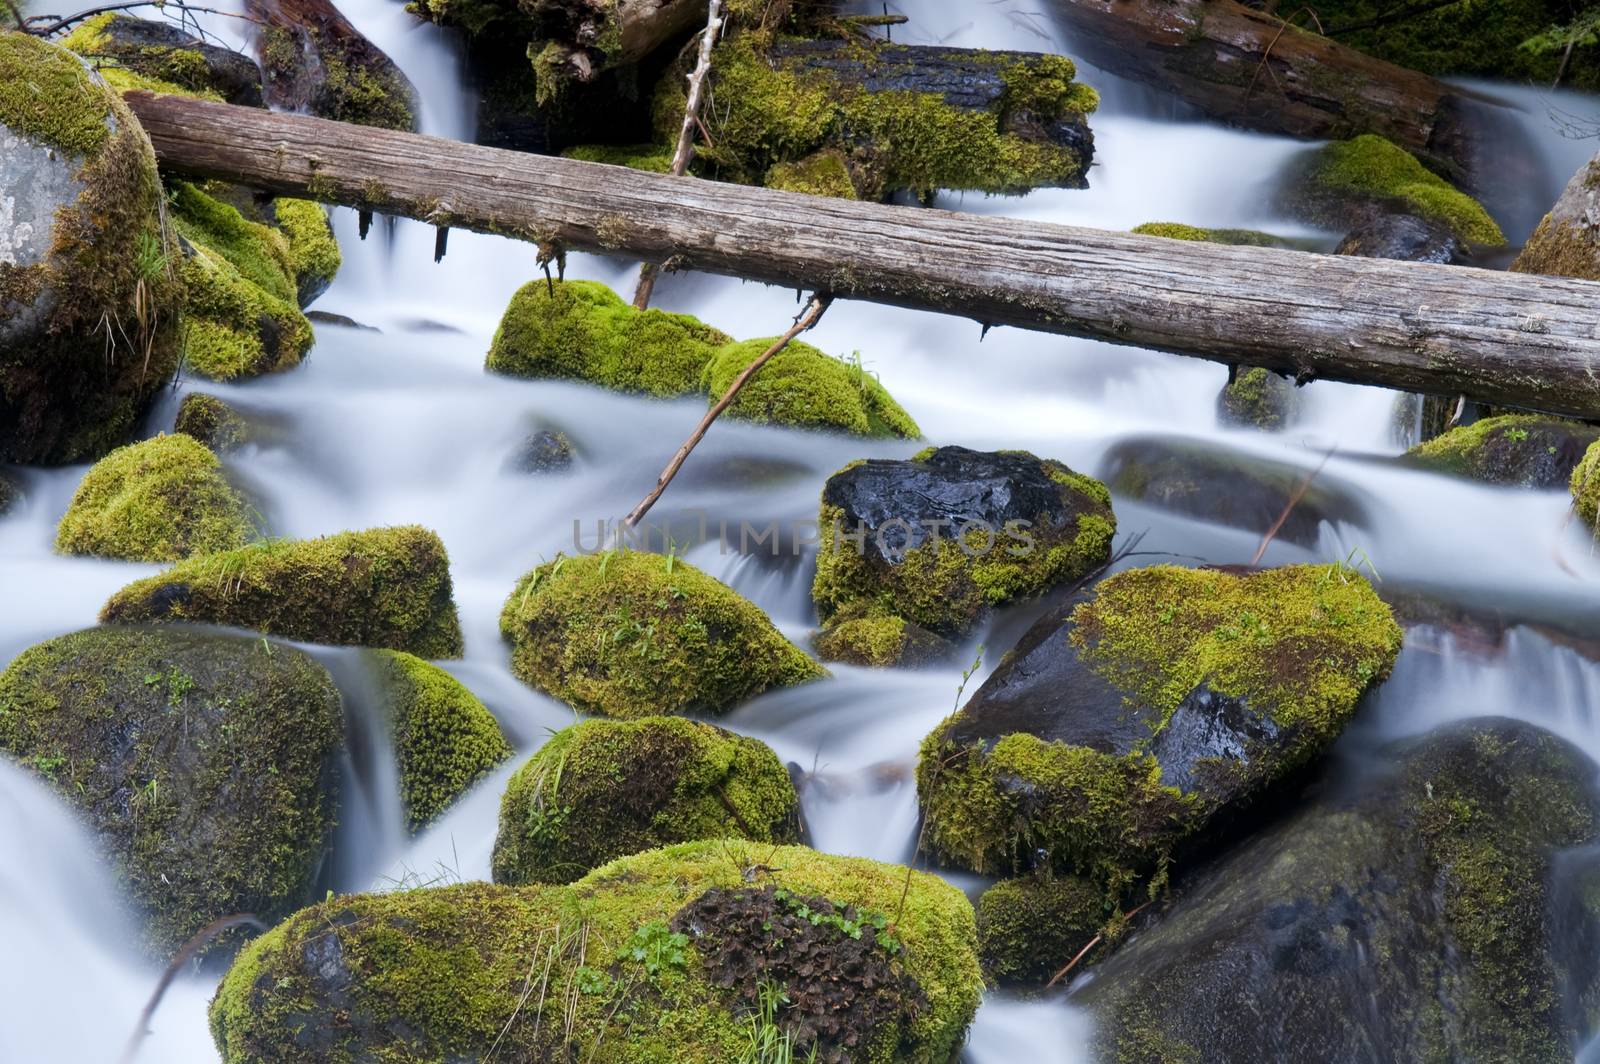 Moss Filled Boulders Fill Stream as Water Rushes By in this Oregon State River